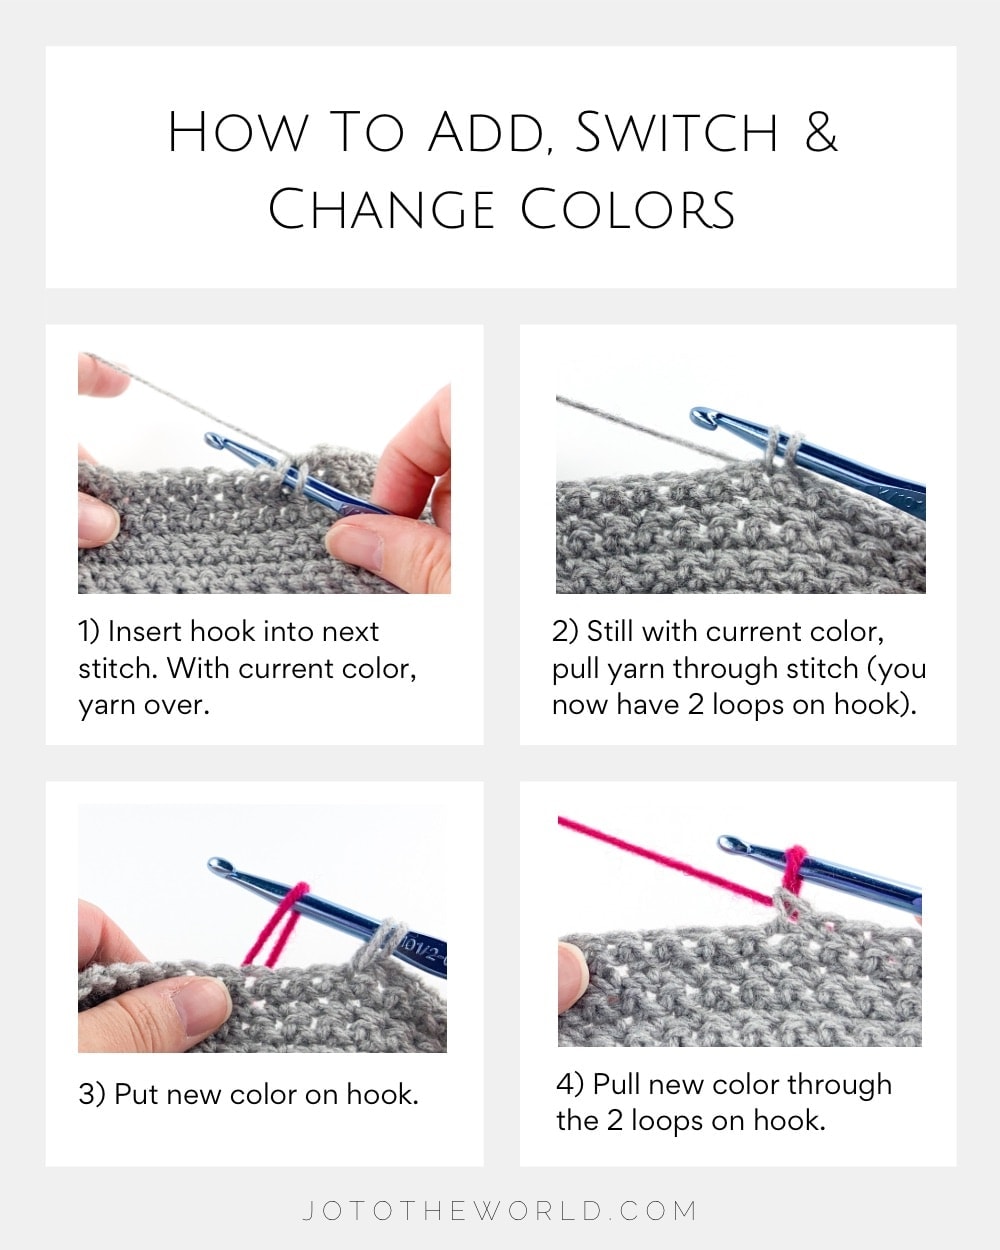 How to Add, Switch and Change Colors in Crochet 